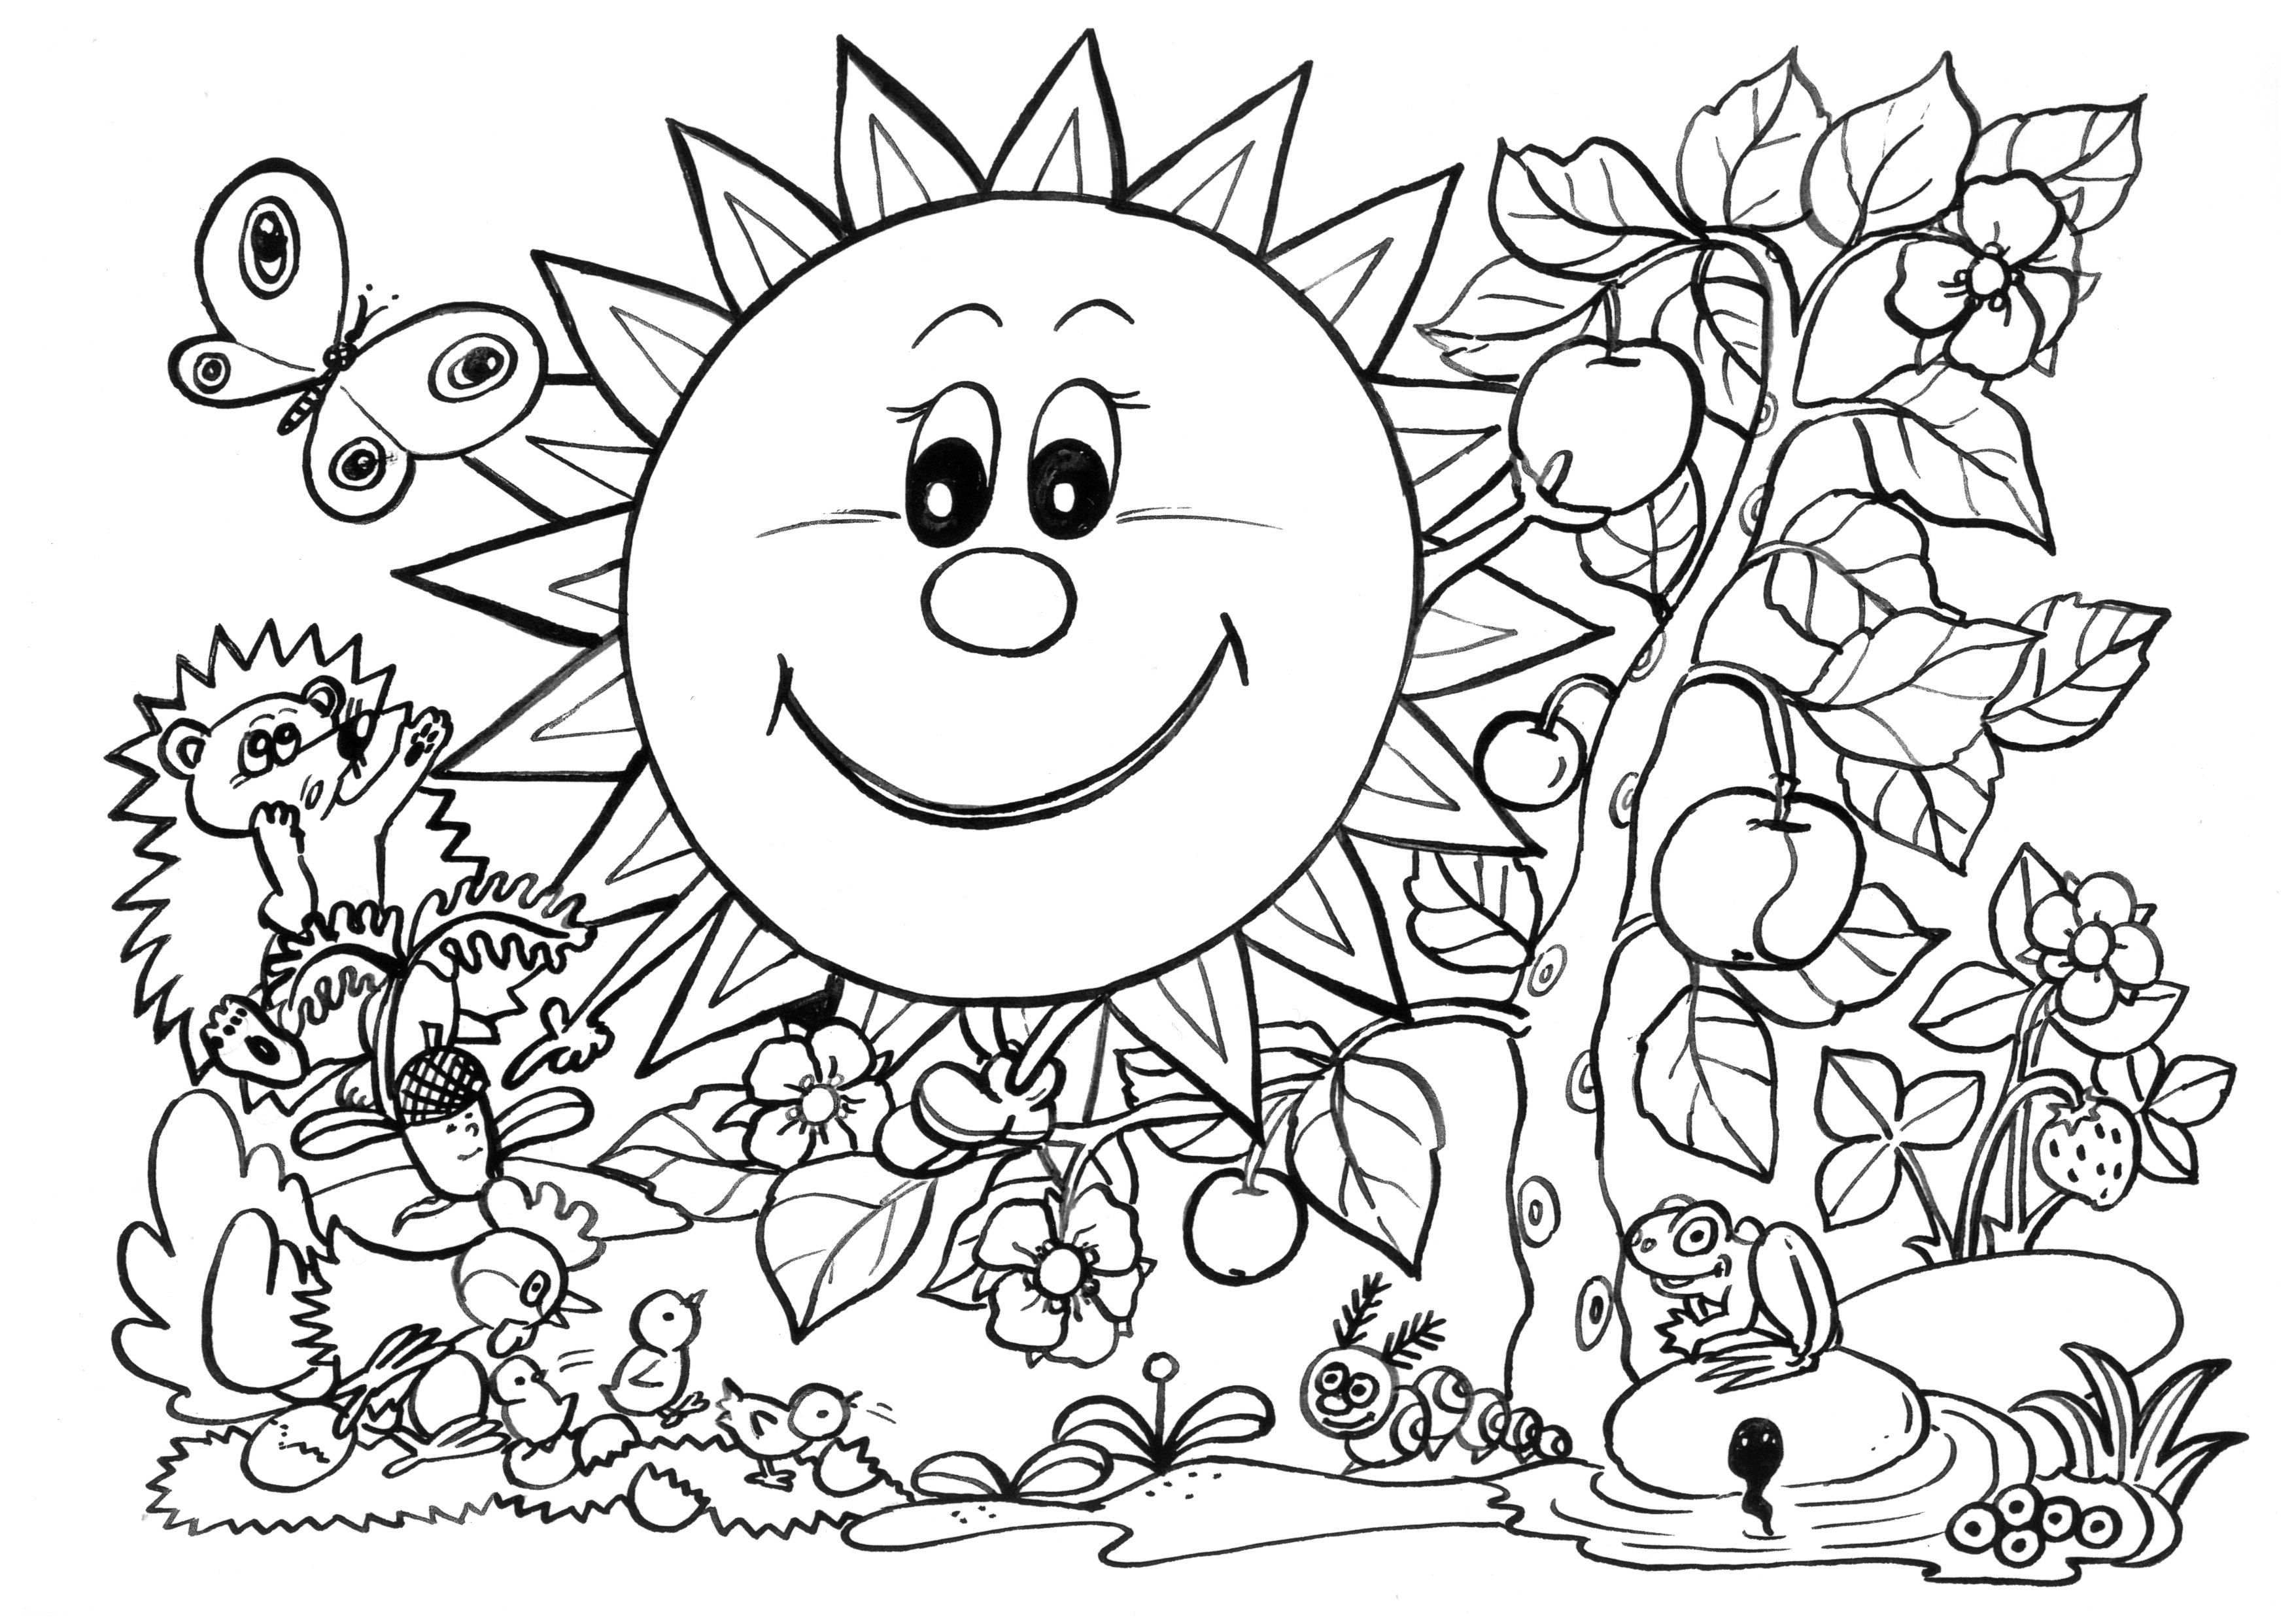 Spring Coloring Pages Sunny Garden Fullsize - Colorine.net | #9434